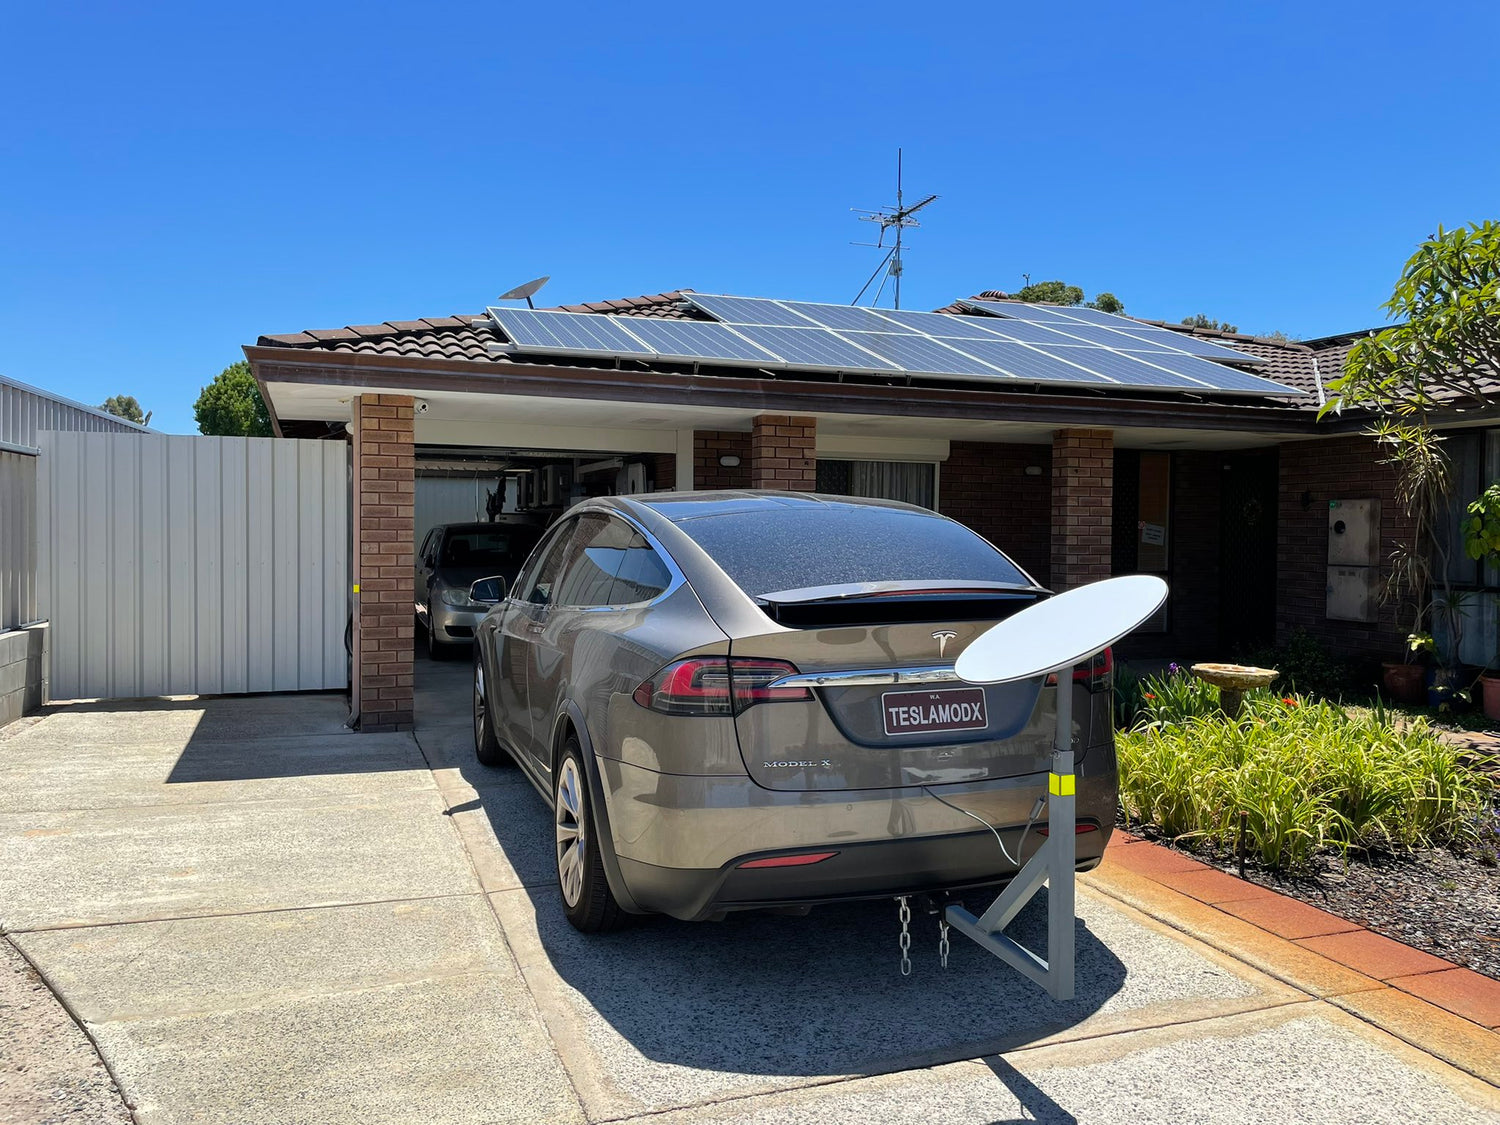 SpaceX Starlink User Mounts Dish Antenna On Tesla Model X, Receives High-Speed Internet Of 200Mbps While Driving